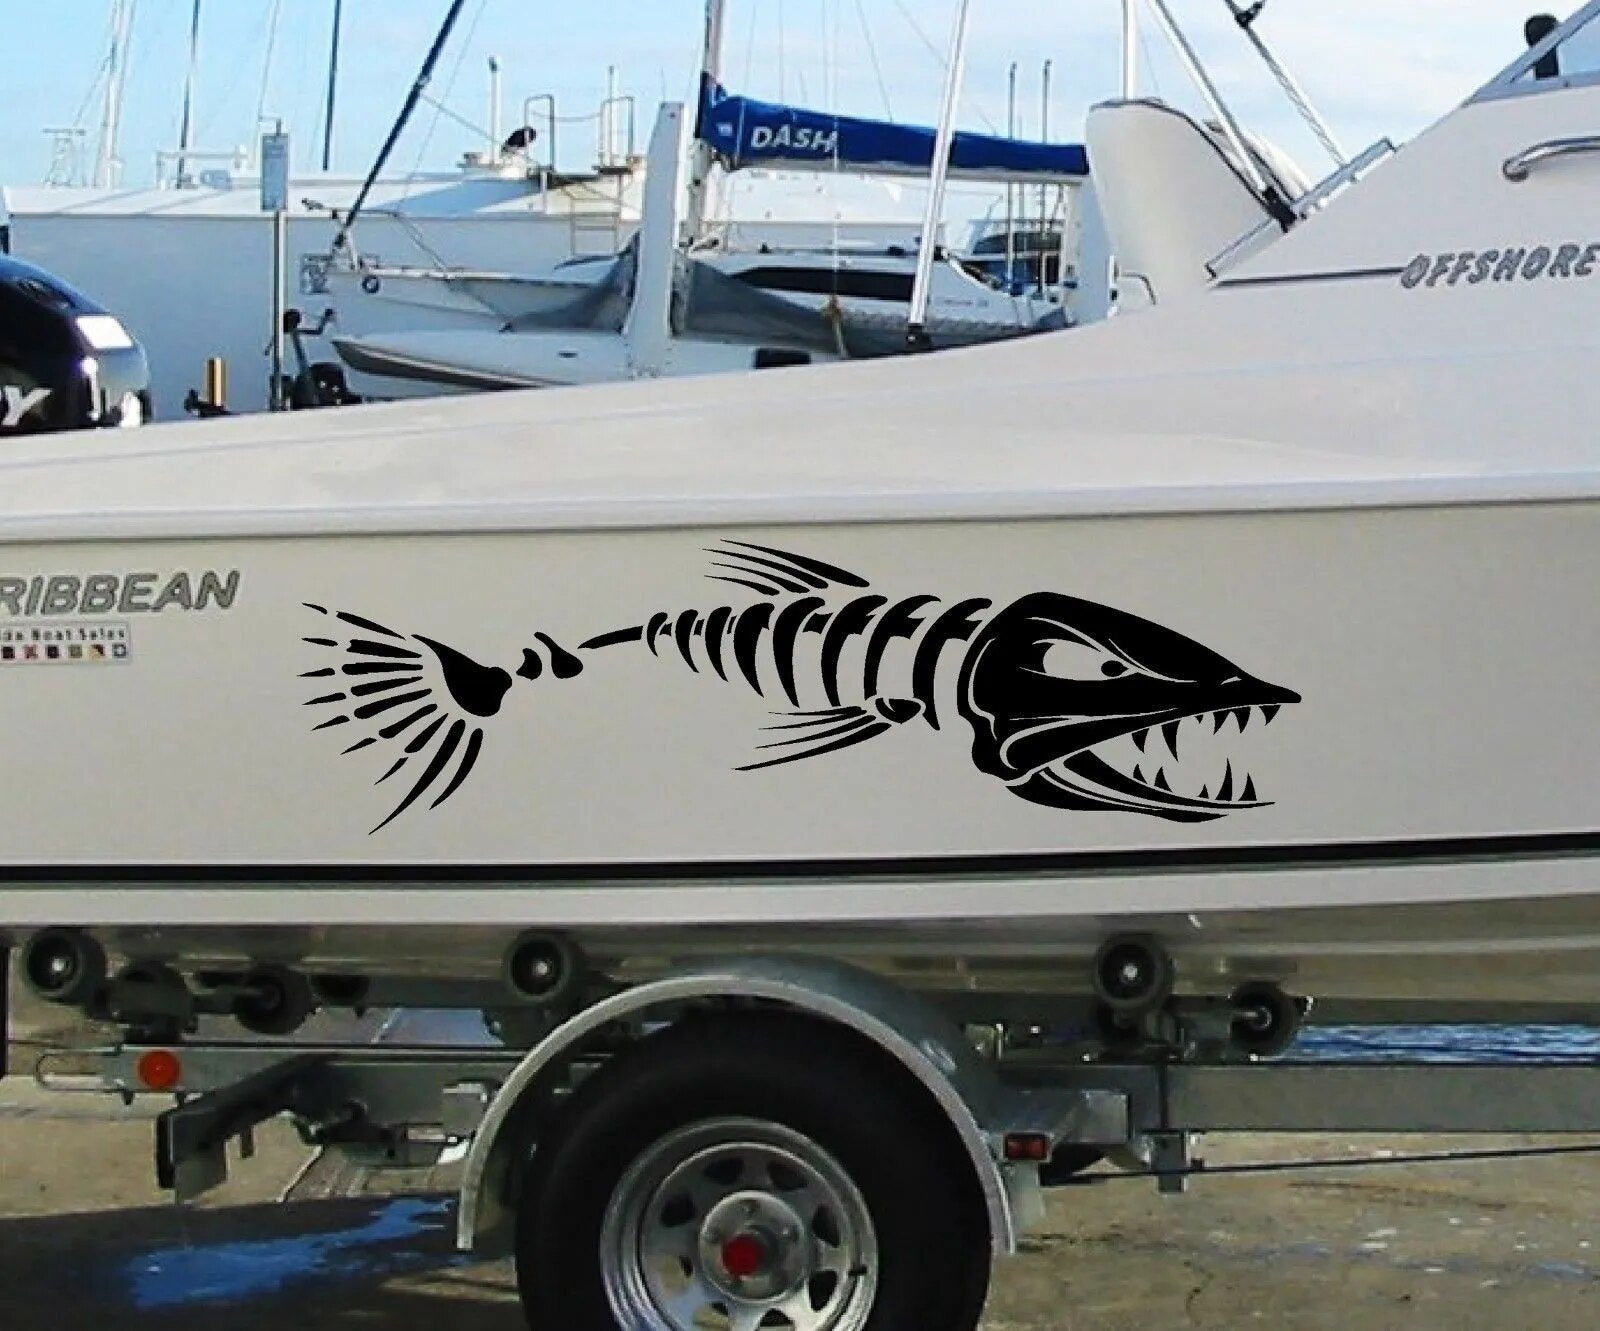 Large Fish Bone Stickers for Boat Body